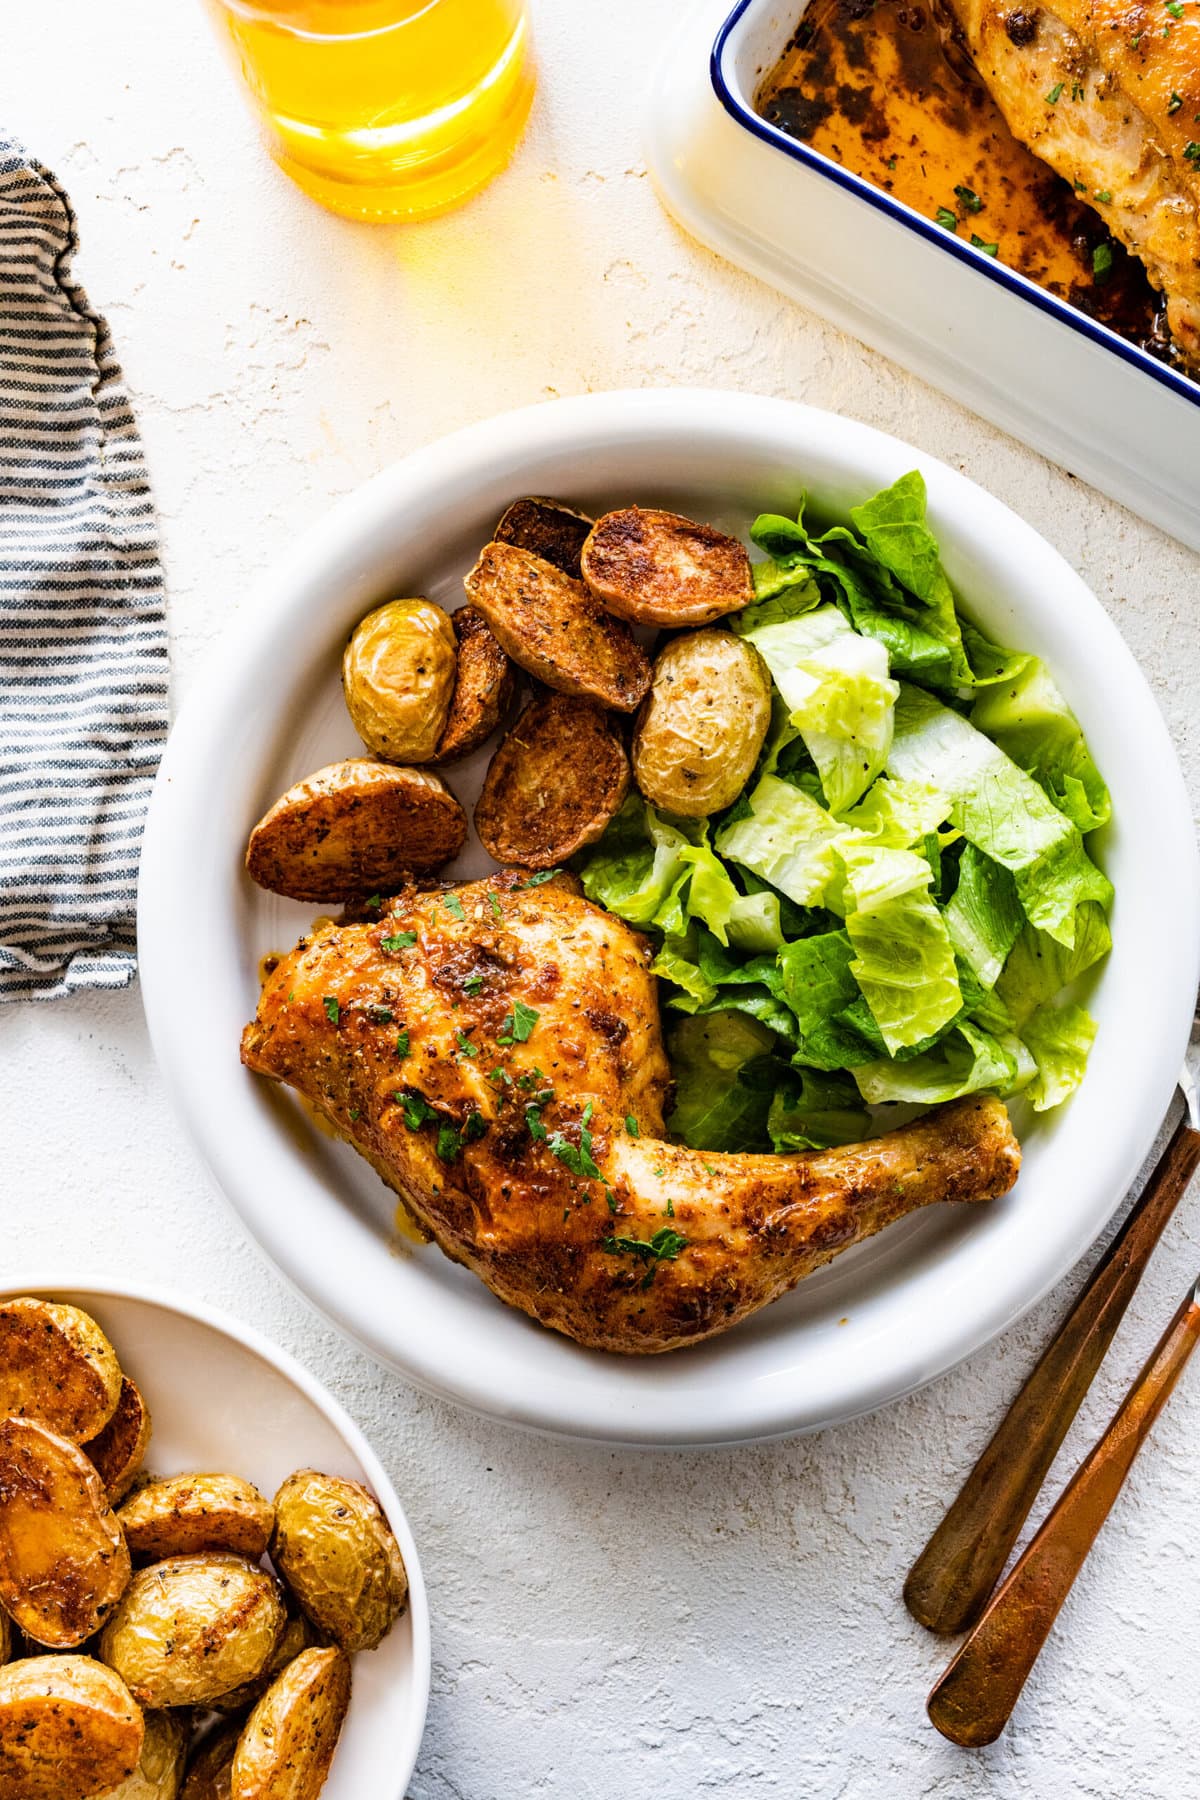 platted baked chicken with potatoes and salad.